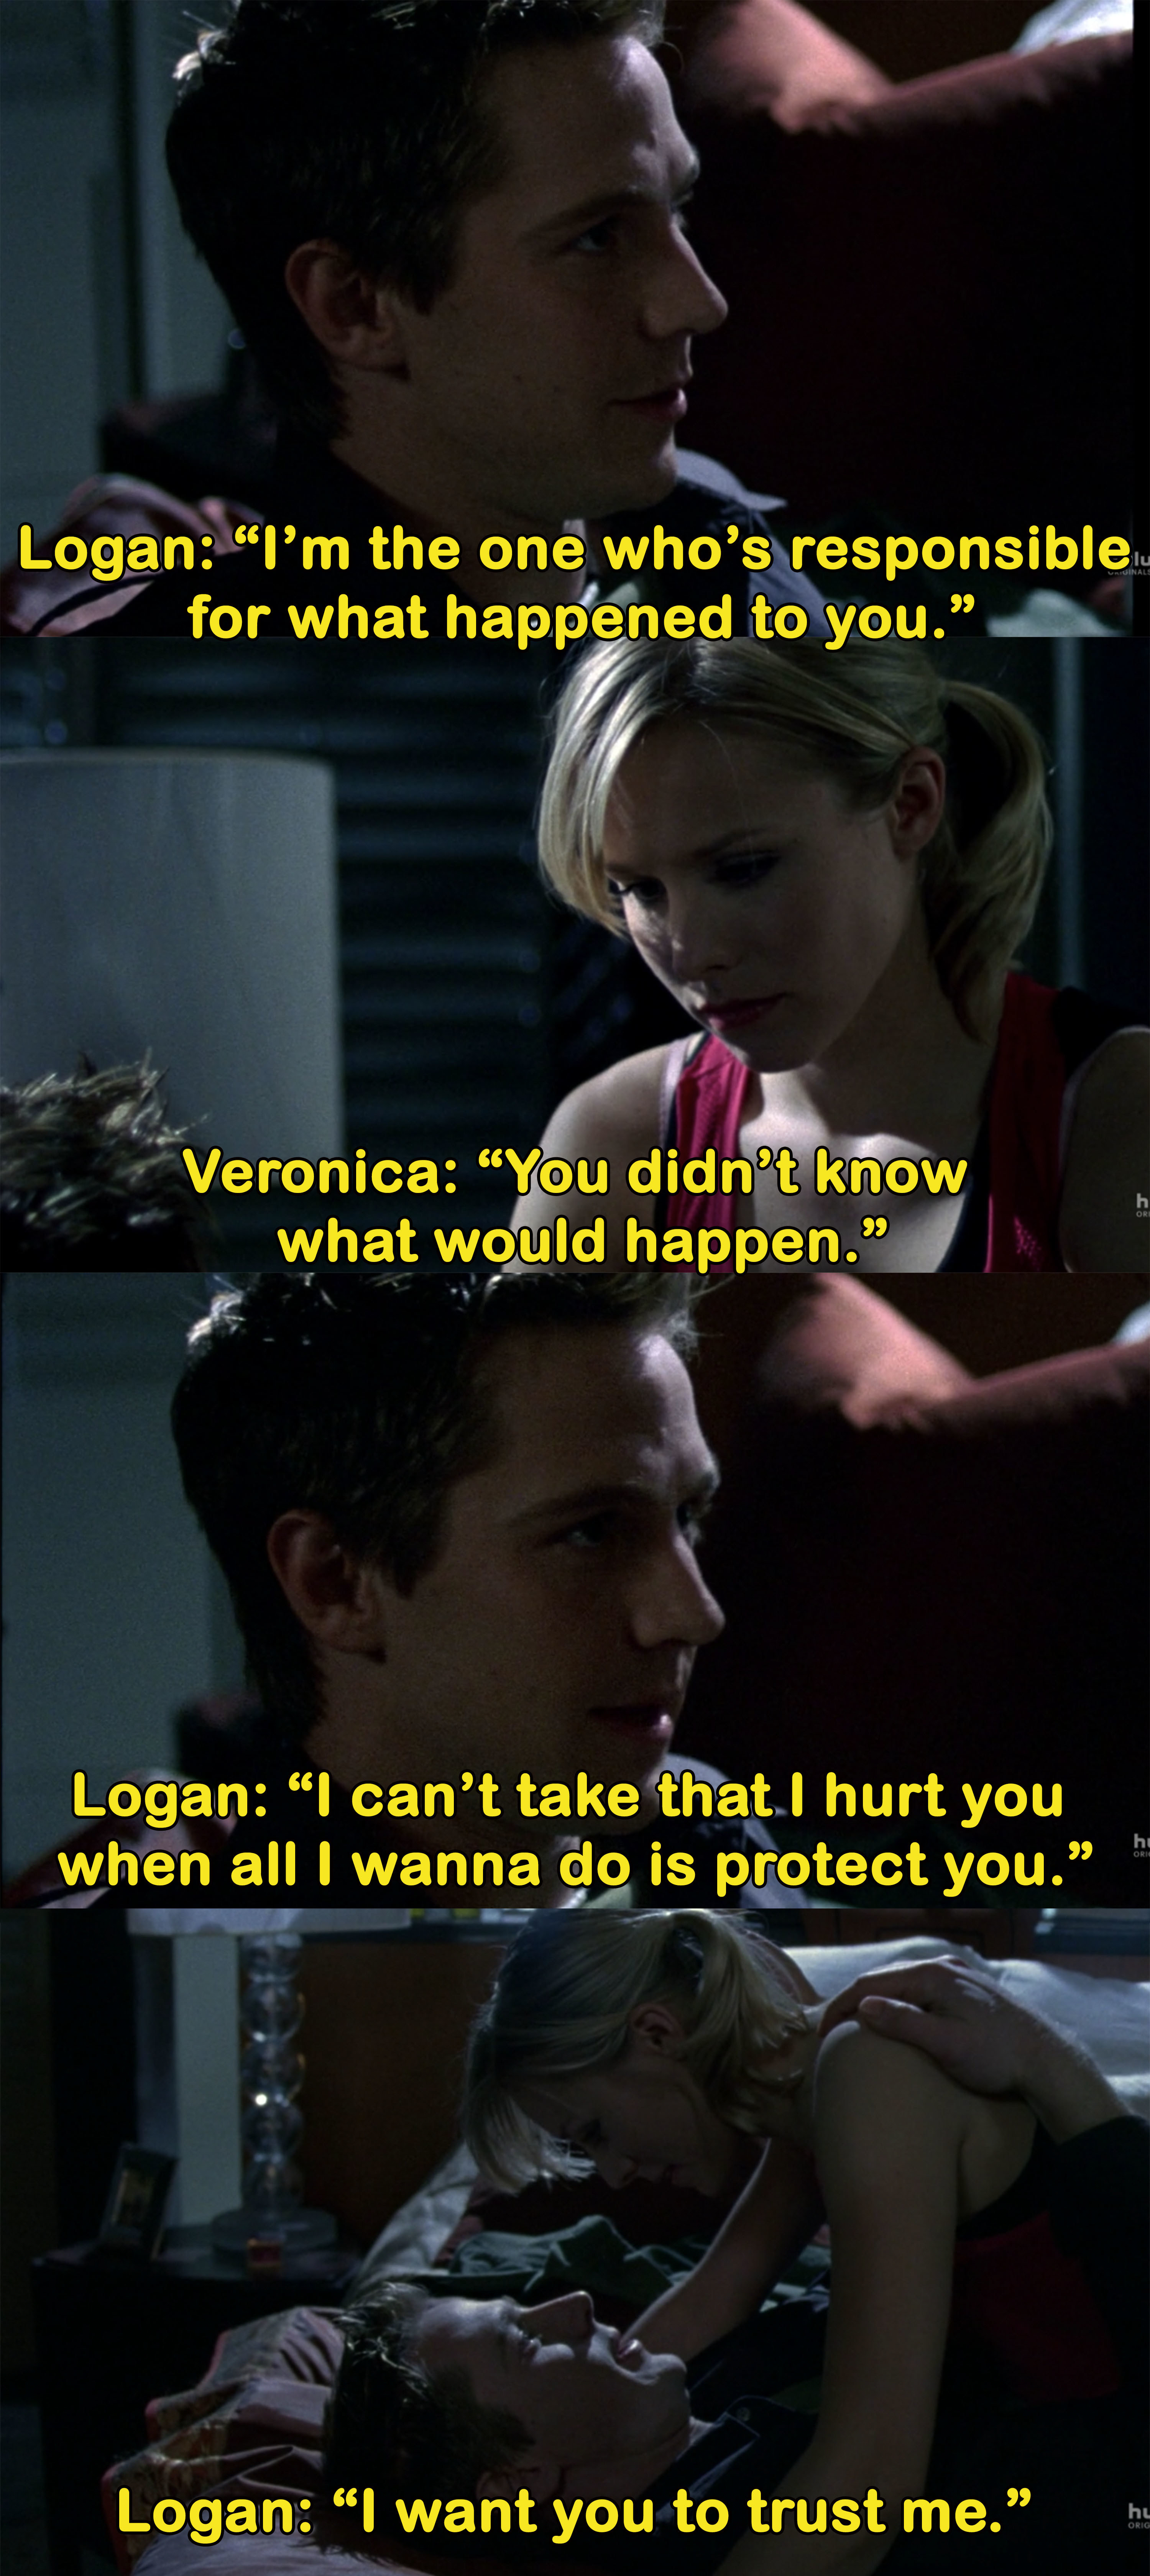 Logan says he can&#x27;t take that he hurt Veronica and that all he wants to do is protect her